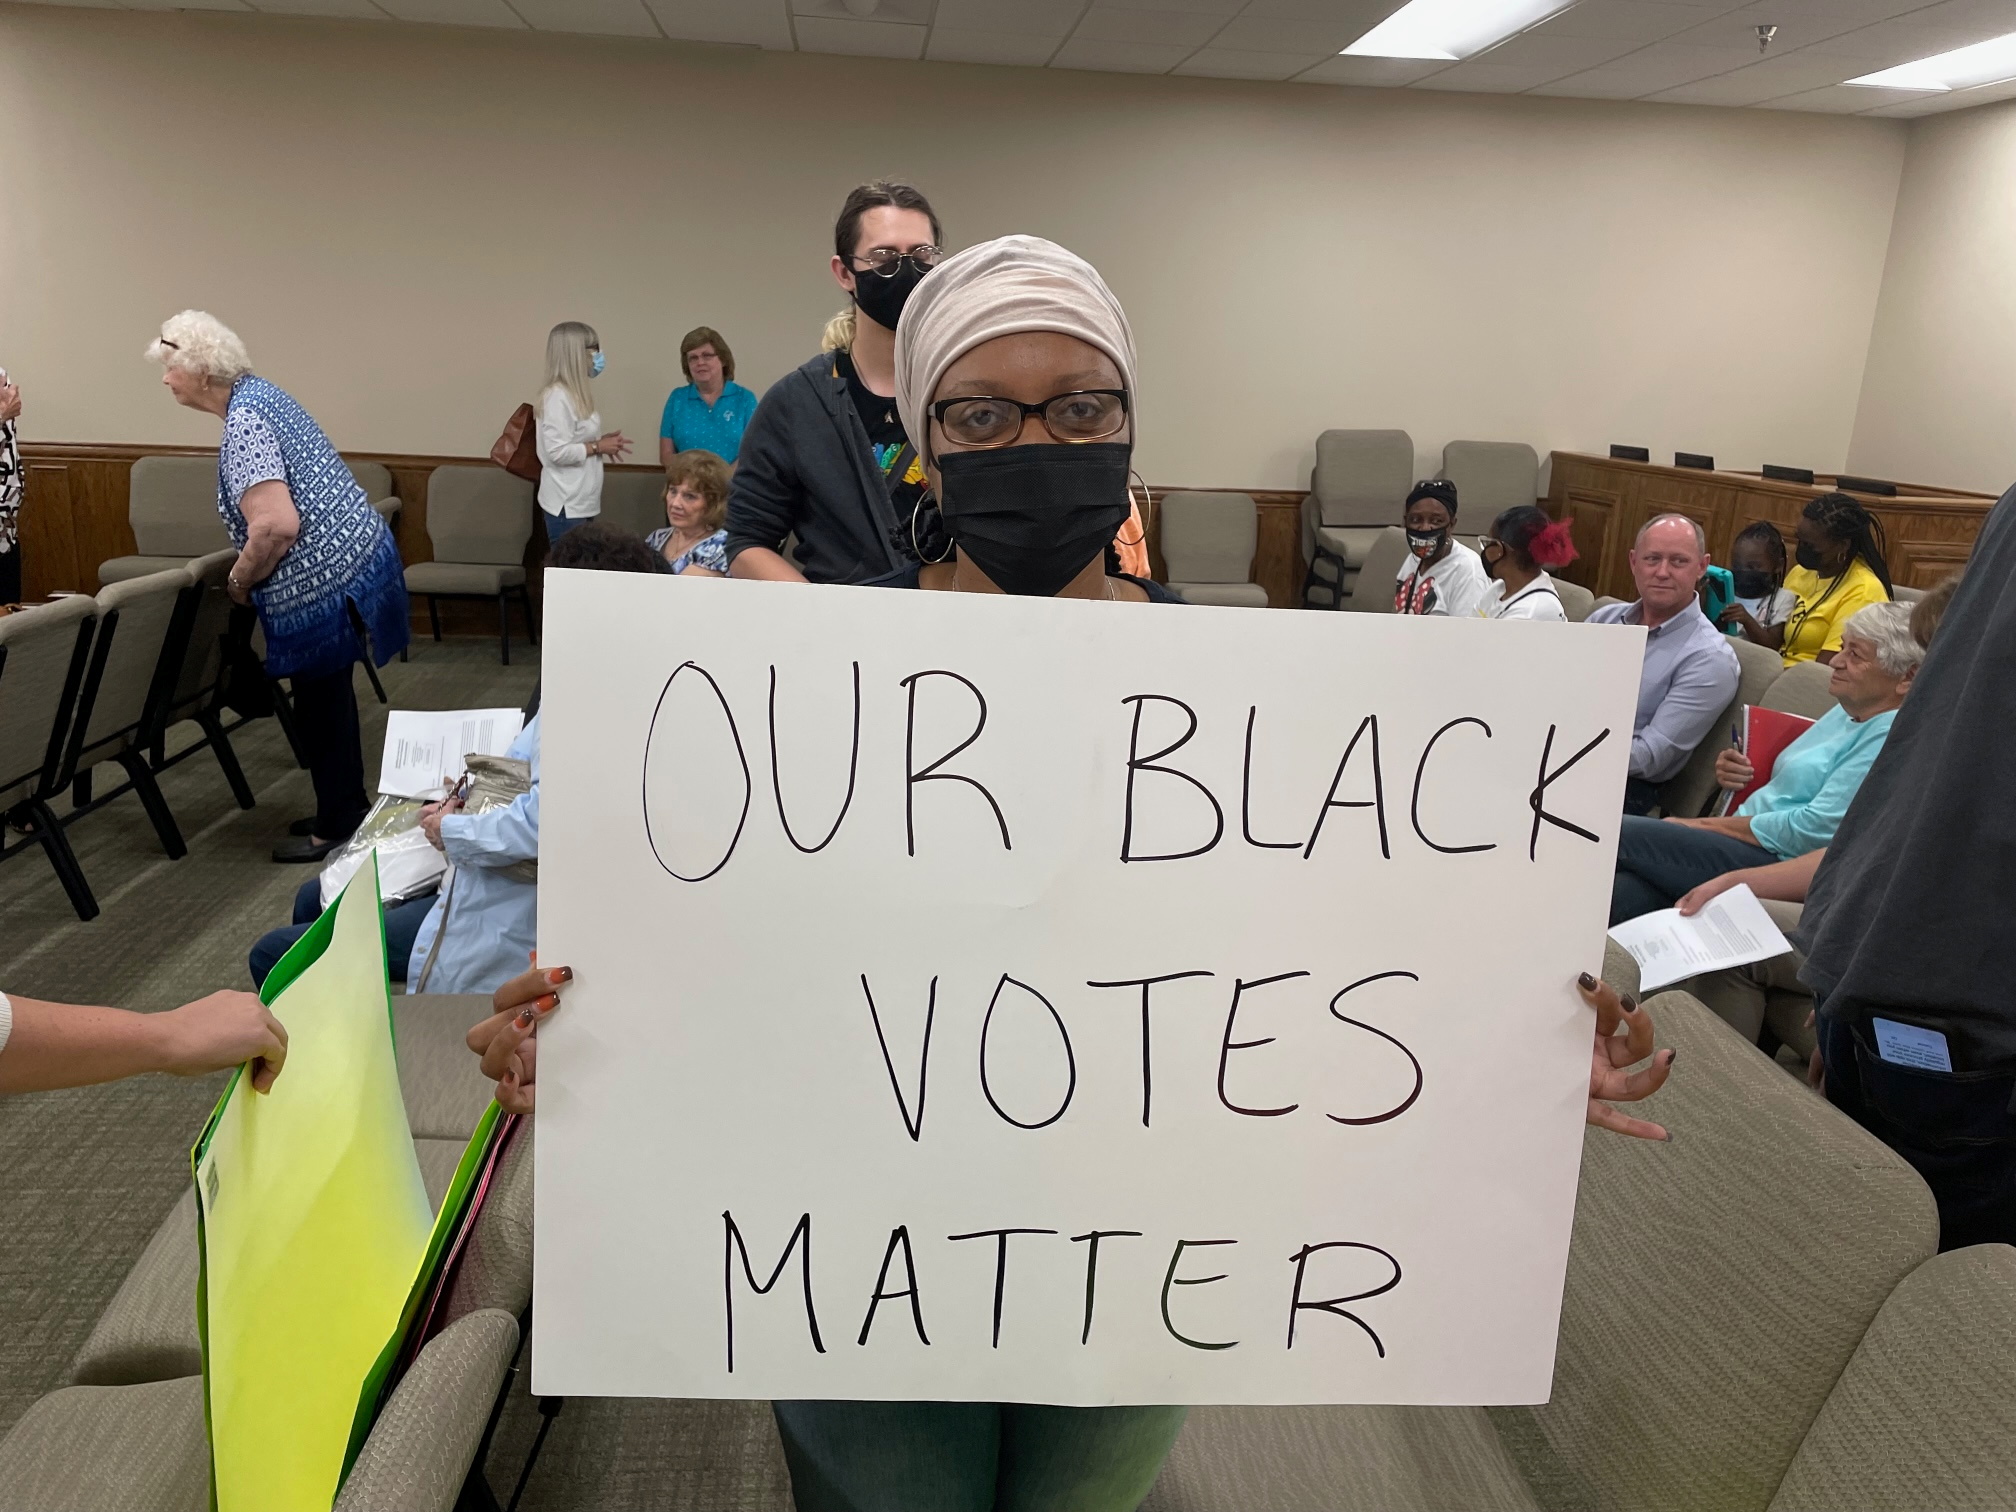 Yoshunda Jones, a local activist who protested the elimination of Sunday voting, holds up a sign in Spalding County, Georgia, U.S., October 12, 2021. REUTERS/Jim Oliphant